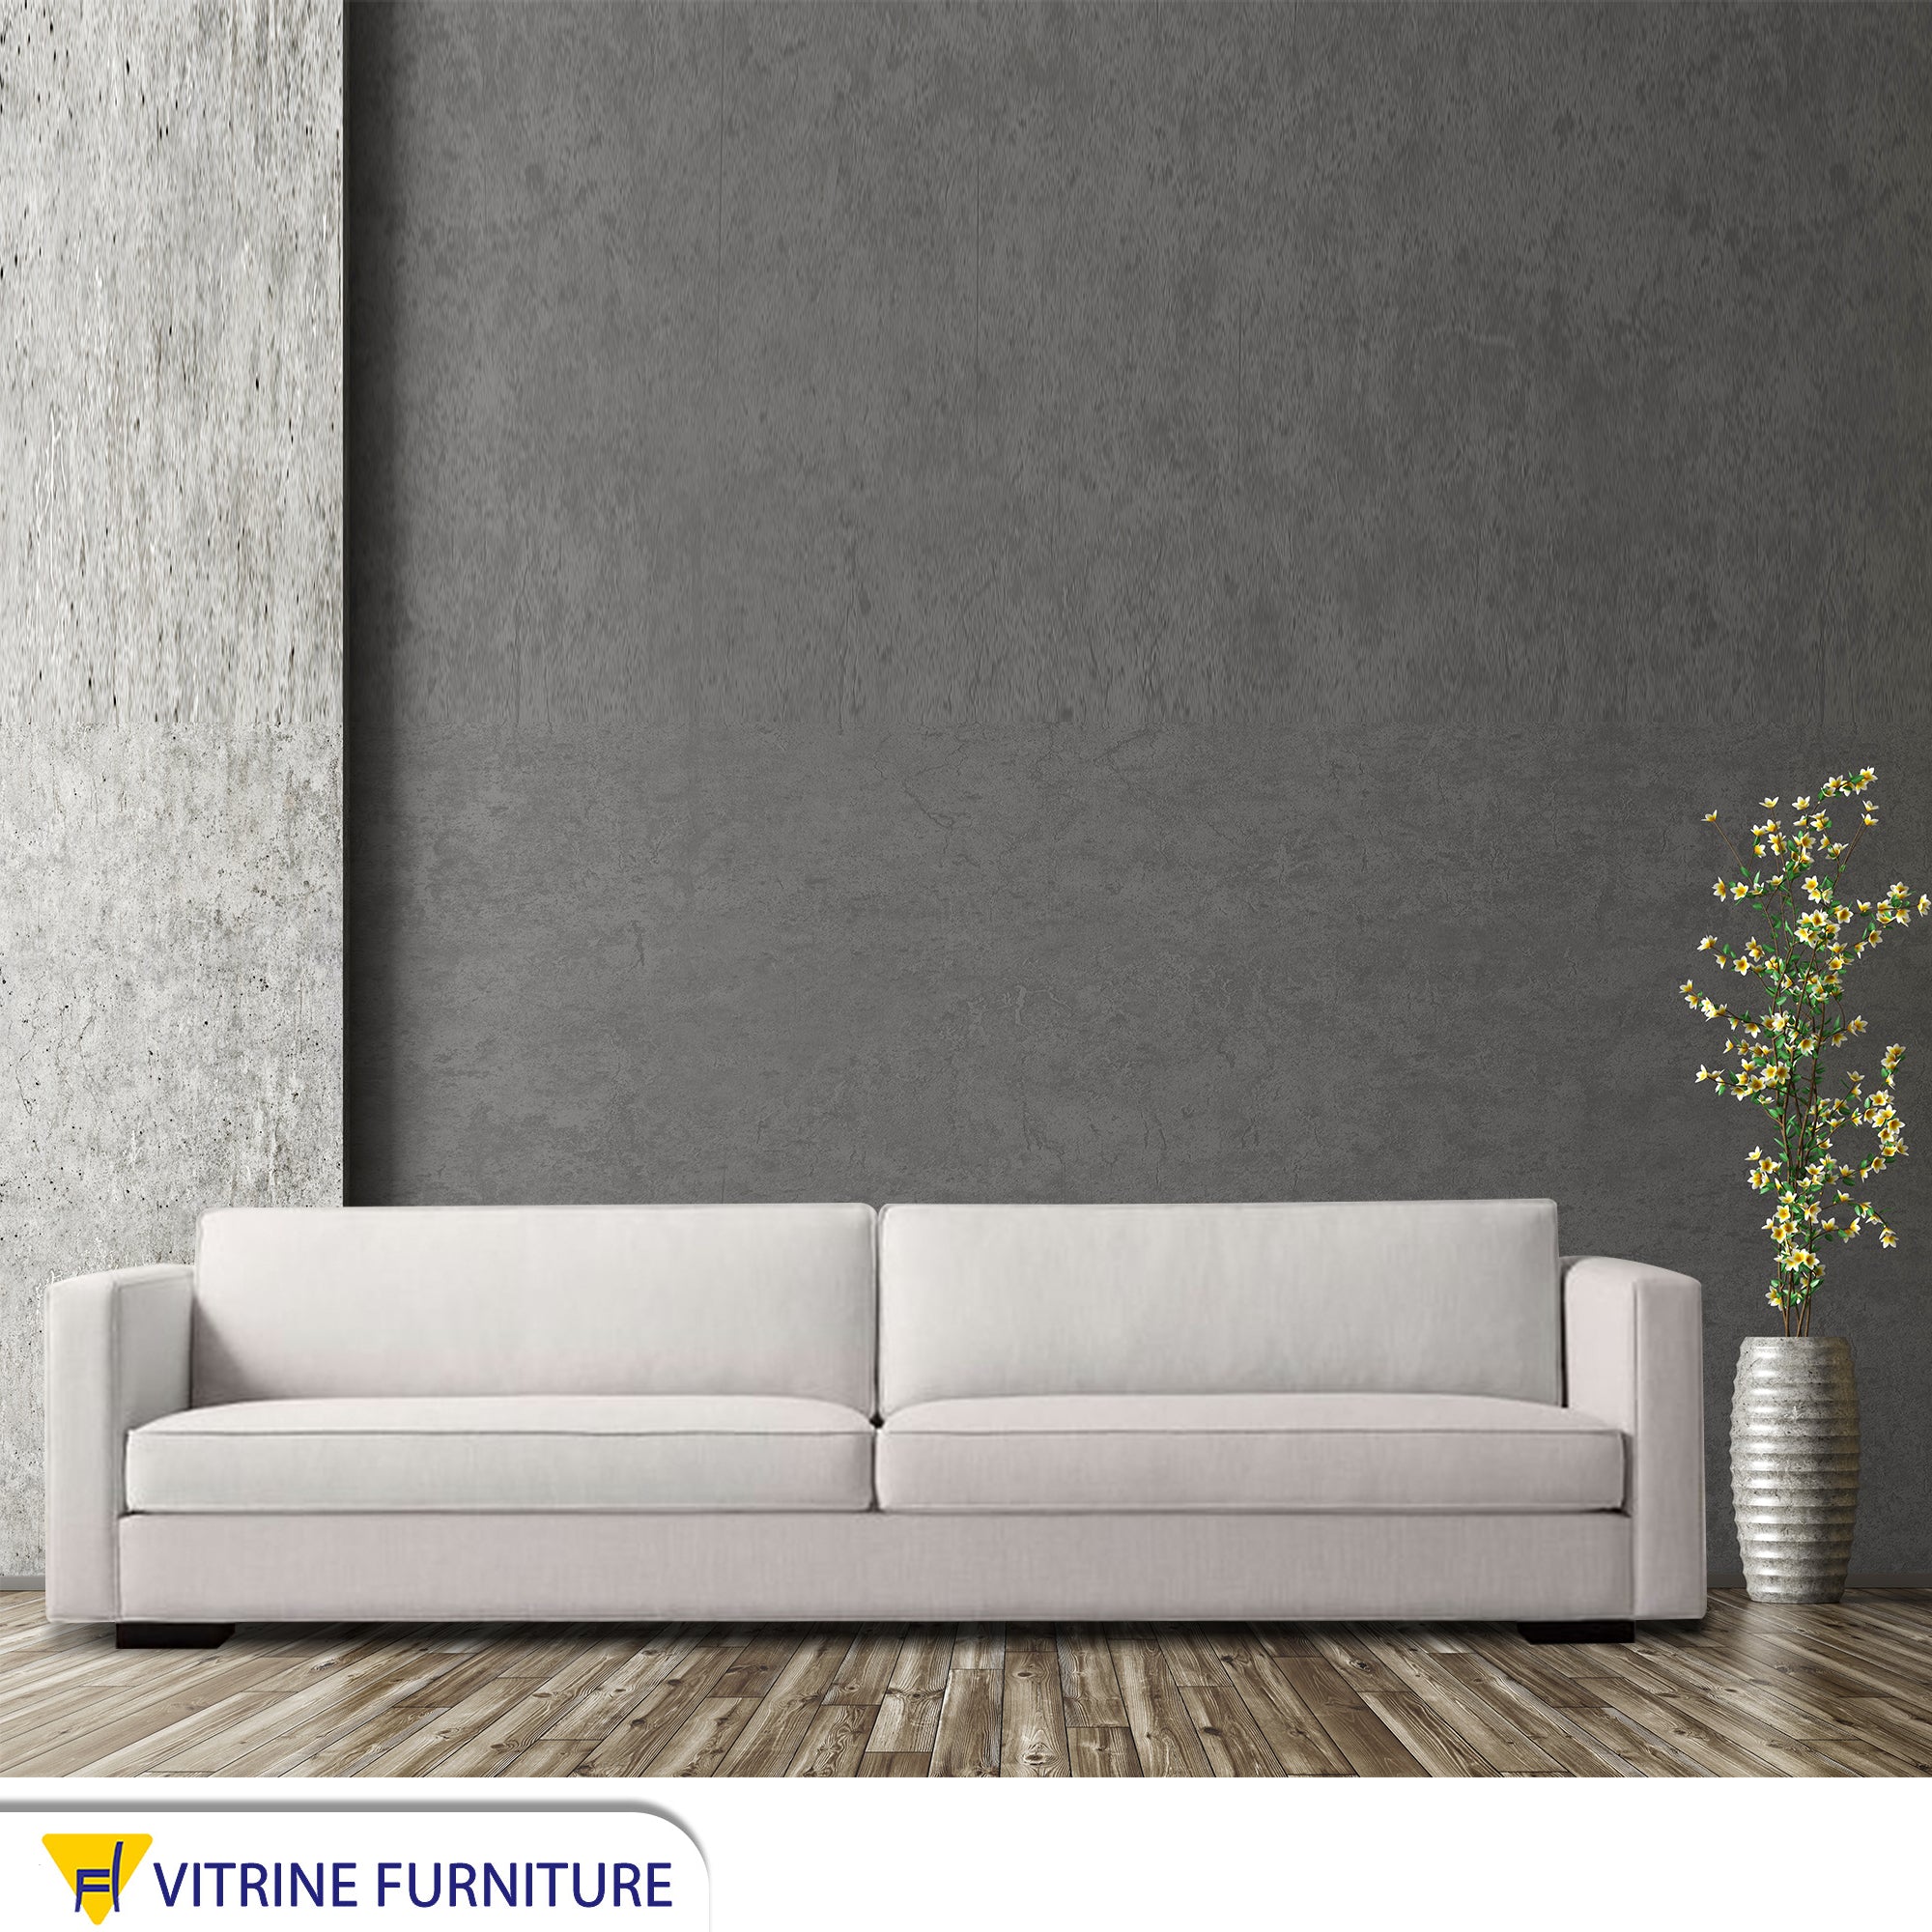 White sofa with thin armrests